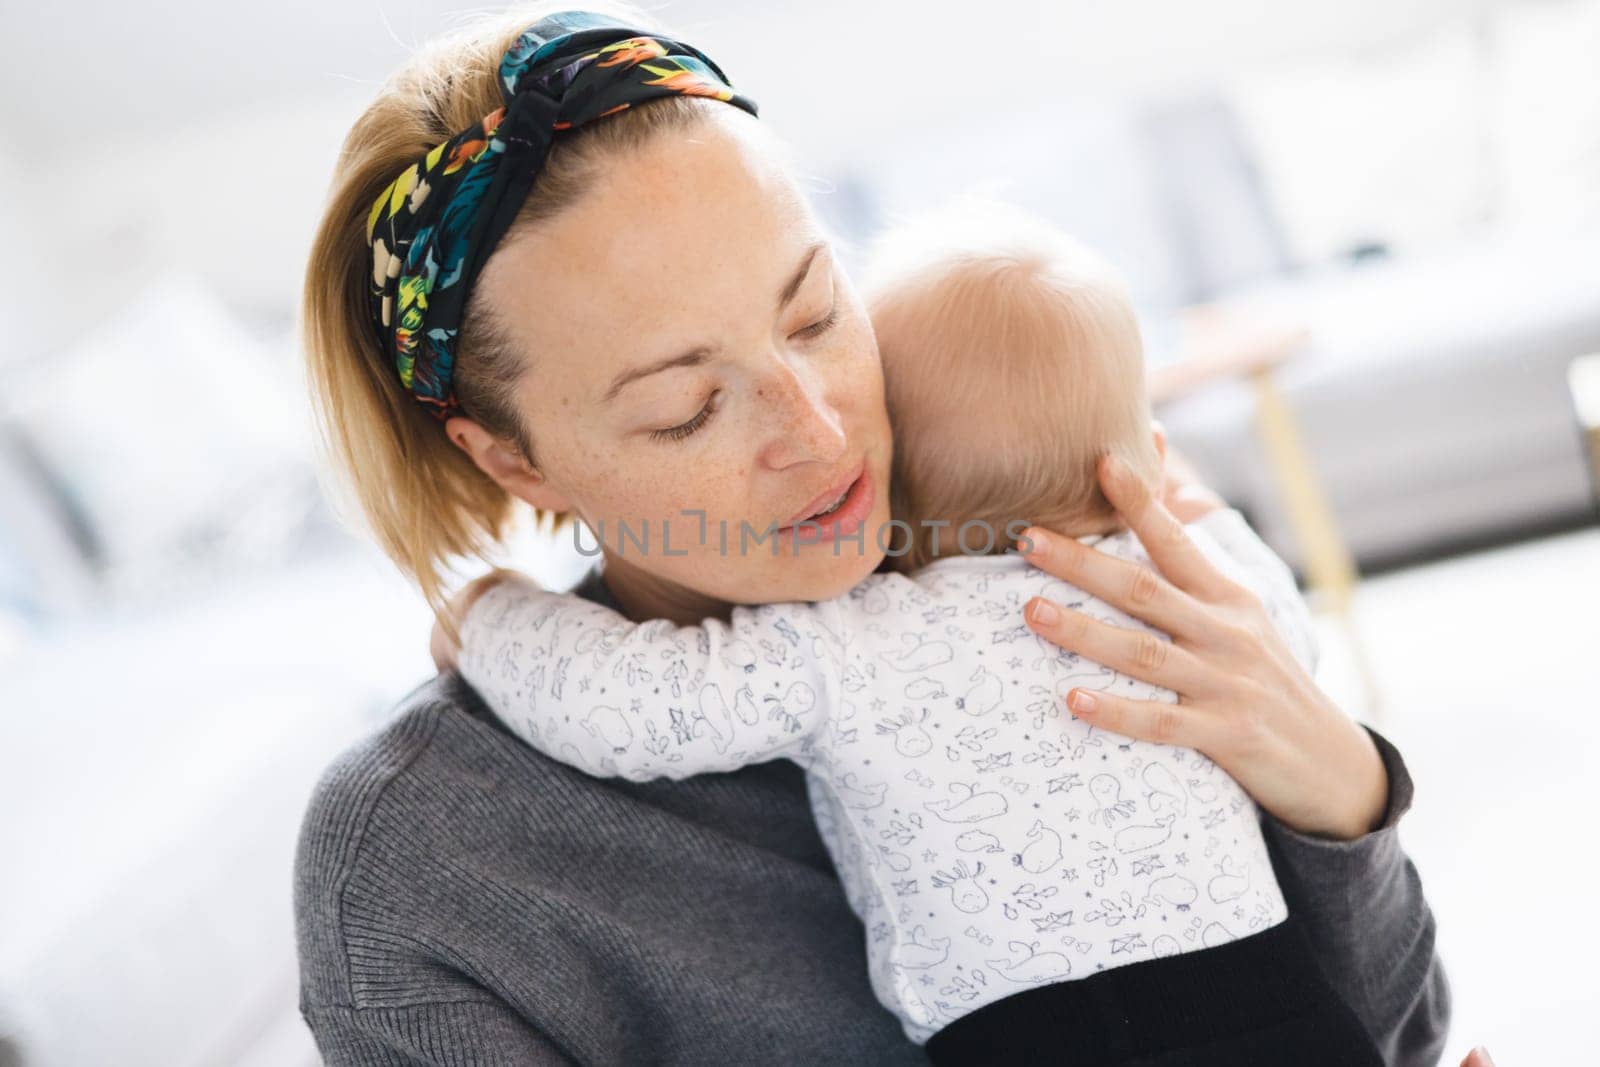 Tender woman caressing her little baby boy infant child outdoors. Mother's unconditional love for her child.